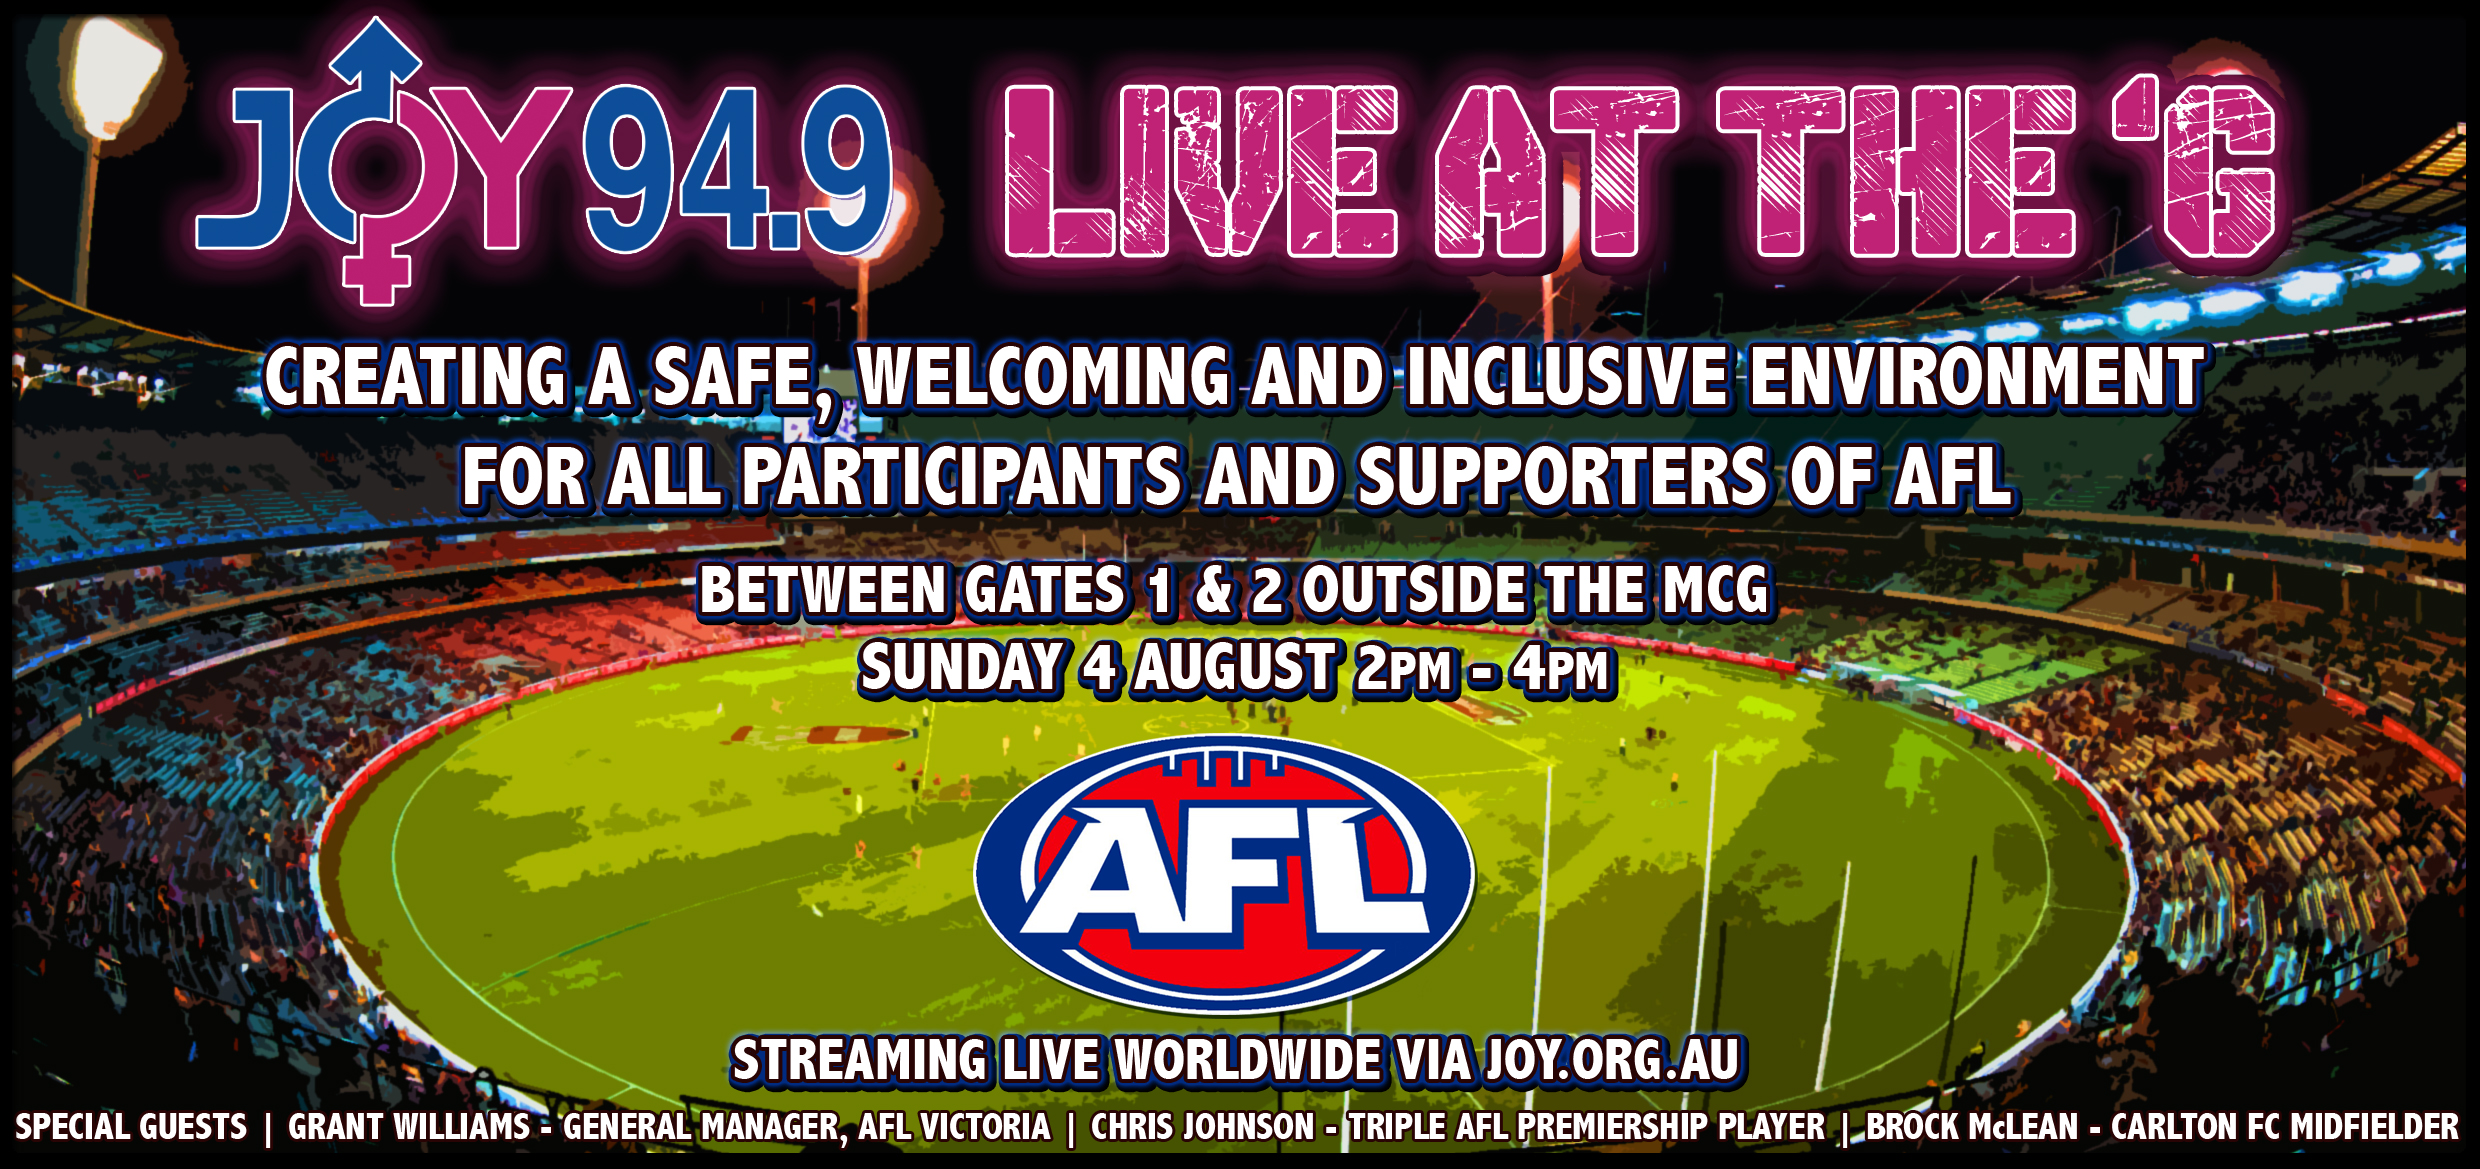 Listen and see JOY live at the ‘G